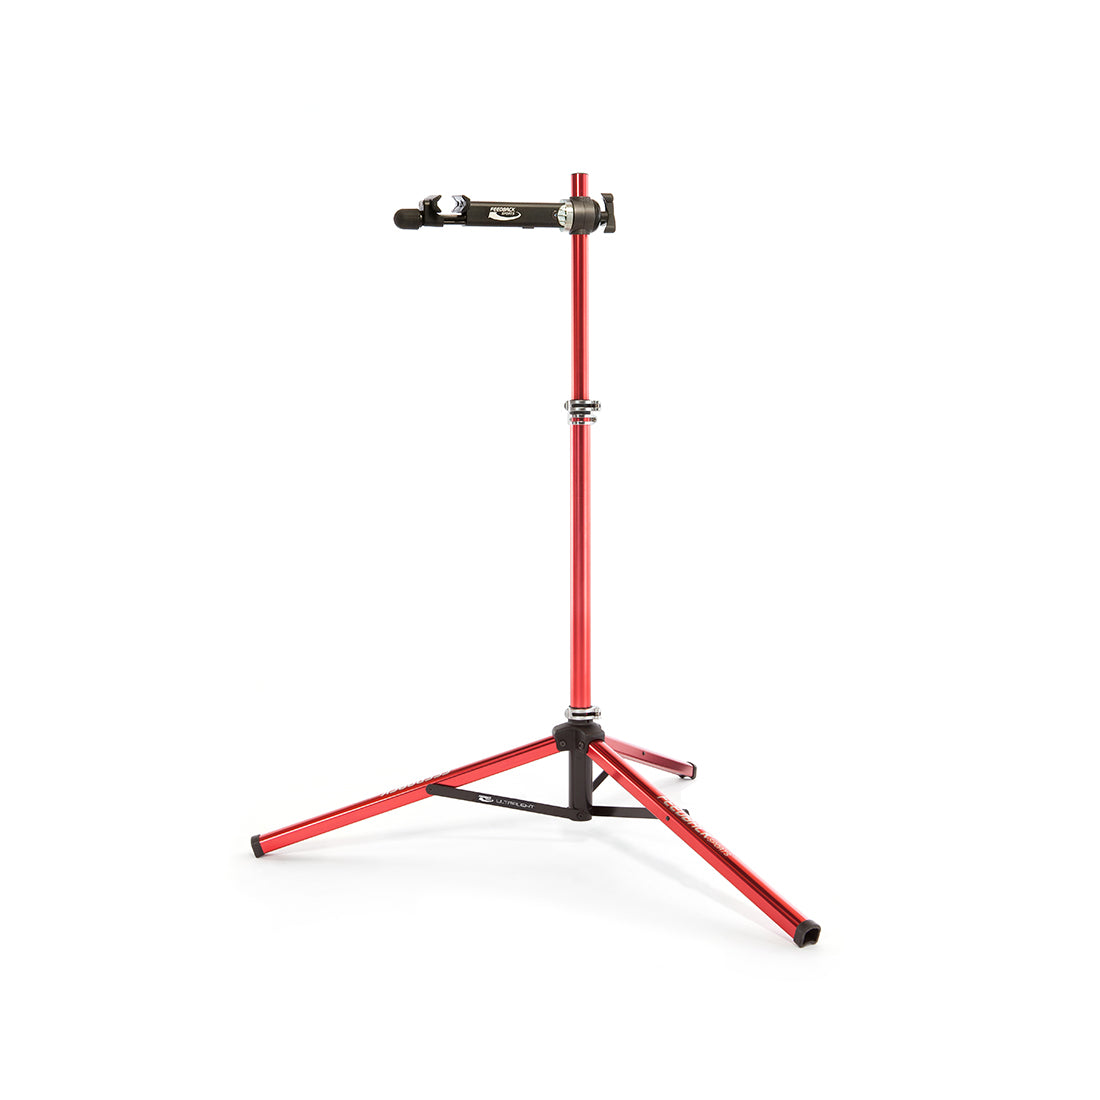 Feedback Sports Ultralight bike repair stand deployed for use on white background.